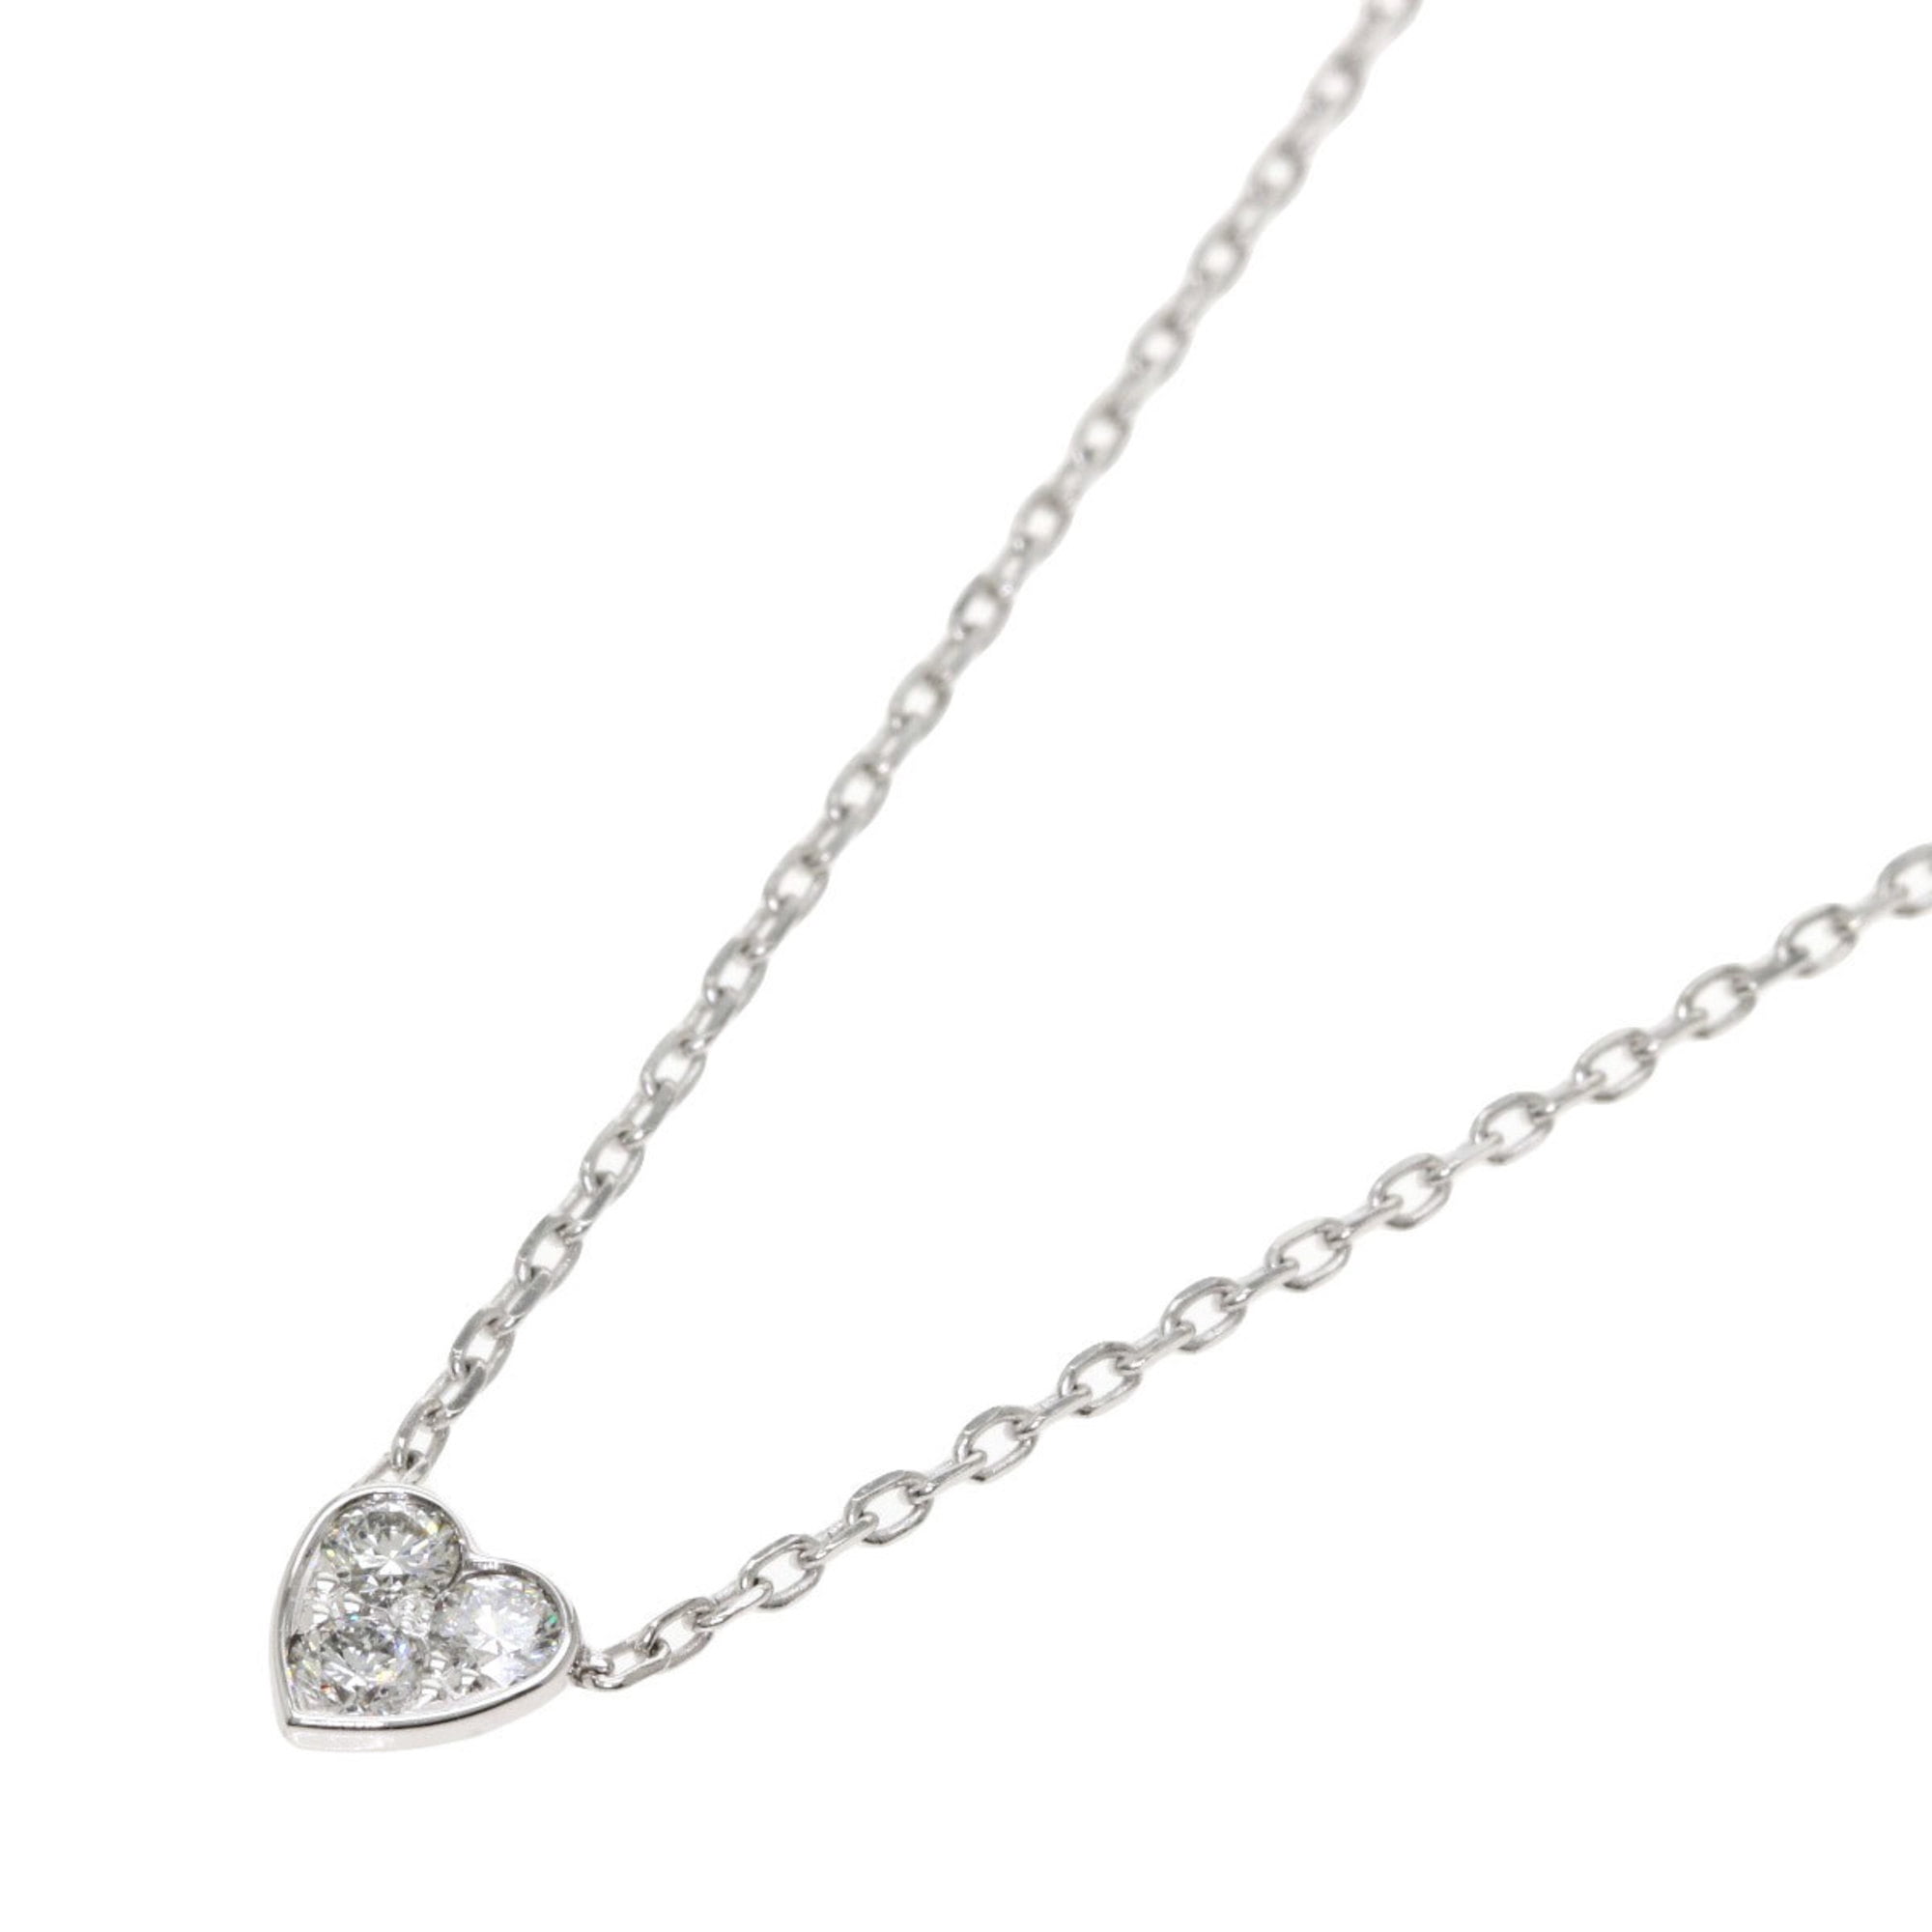 Cartier Pre-Owned Cartier Interlocking Circle Love Necklace With Diamonds  0.22 CTW 129629 - Jomashop